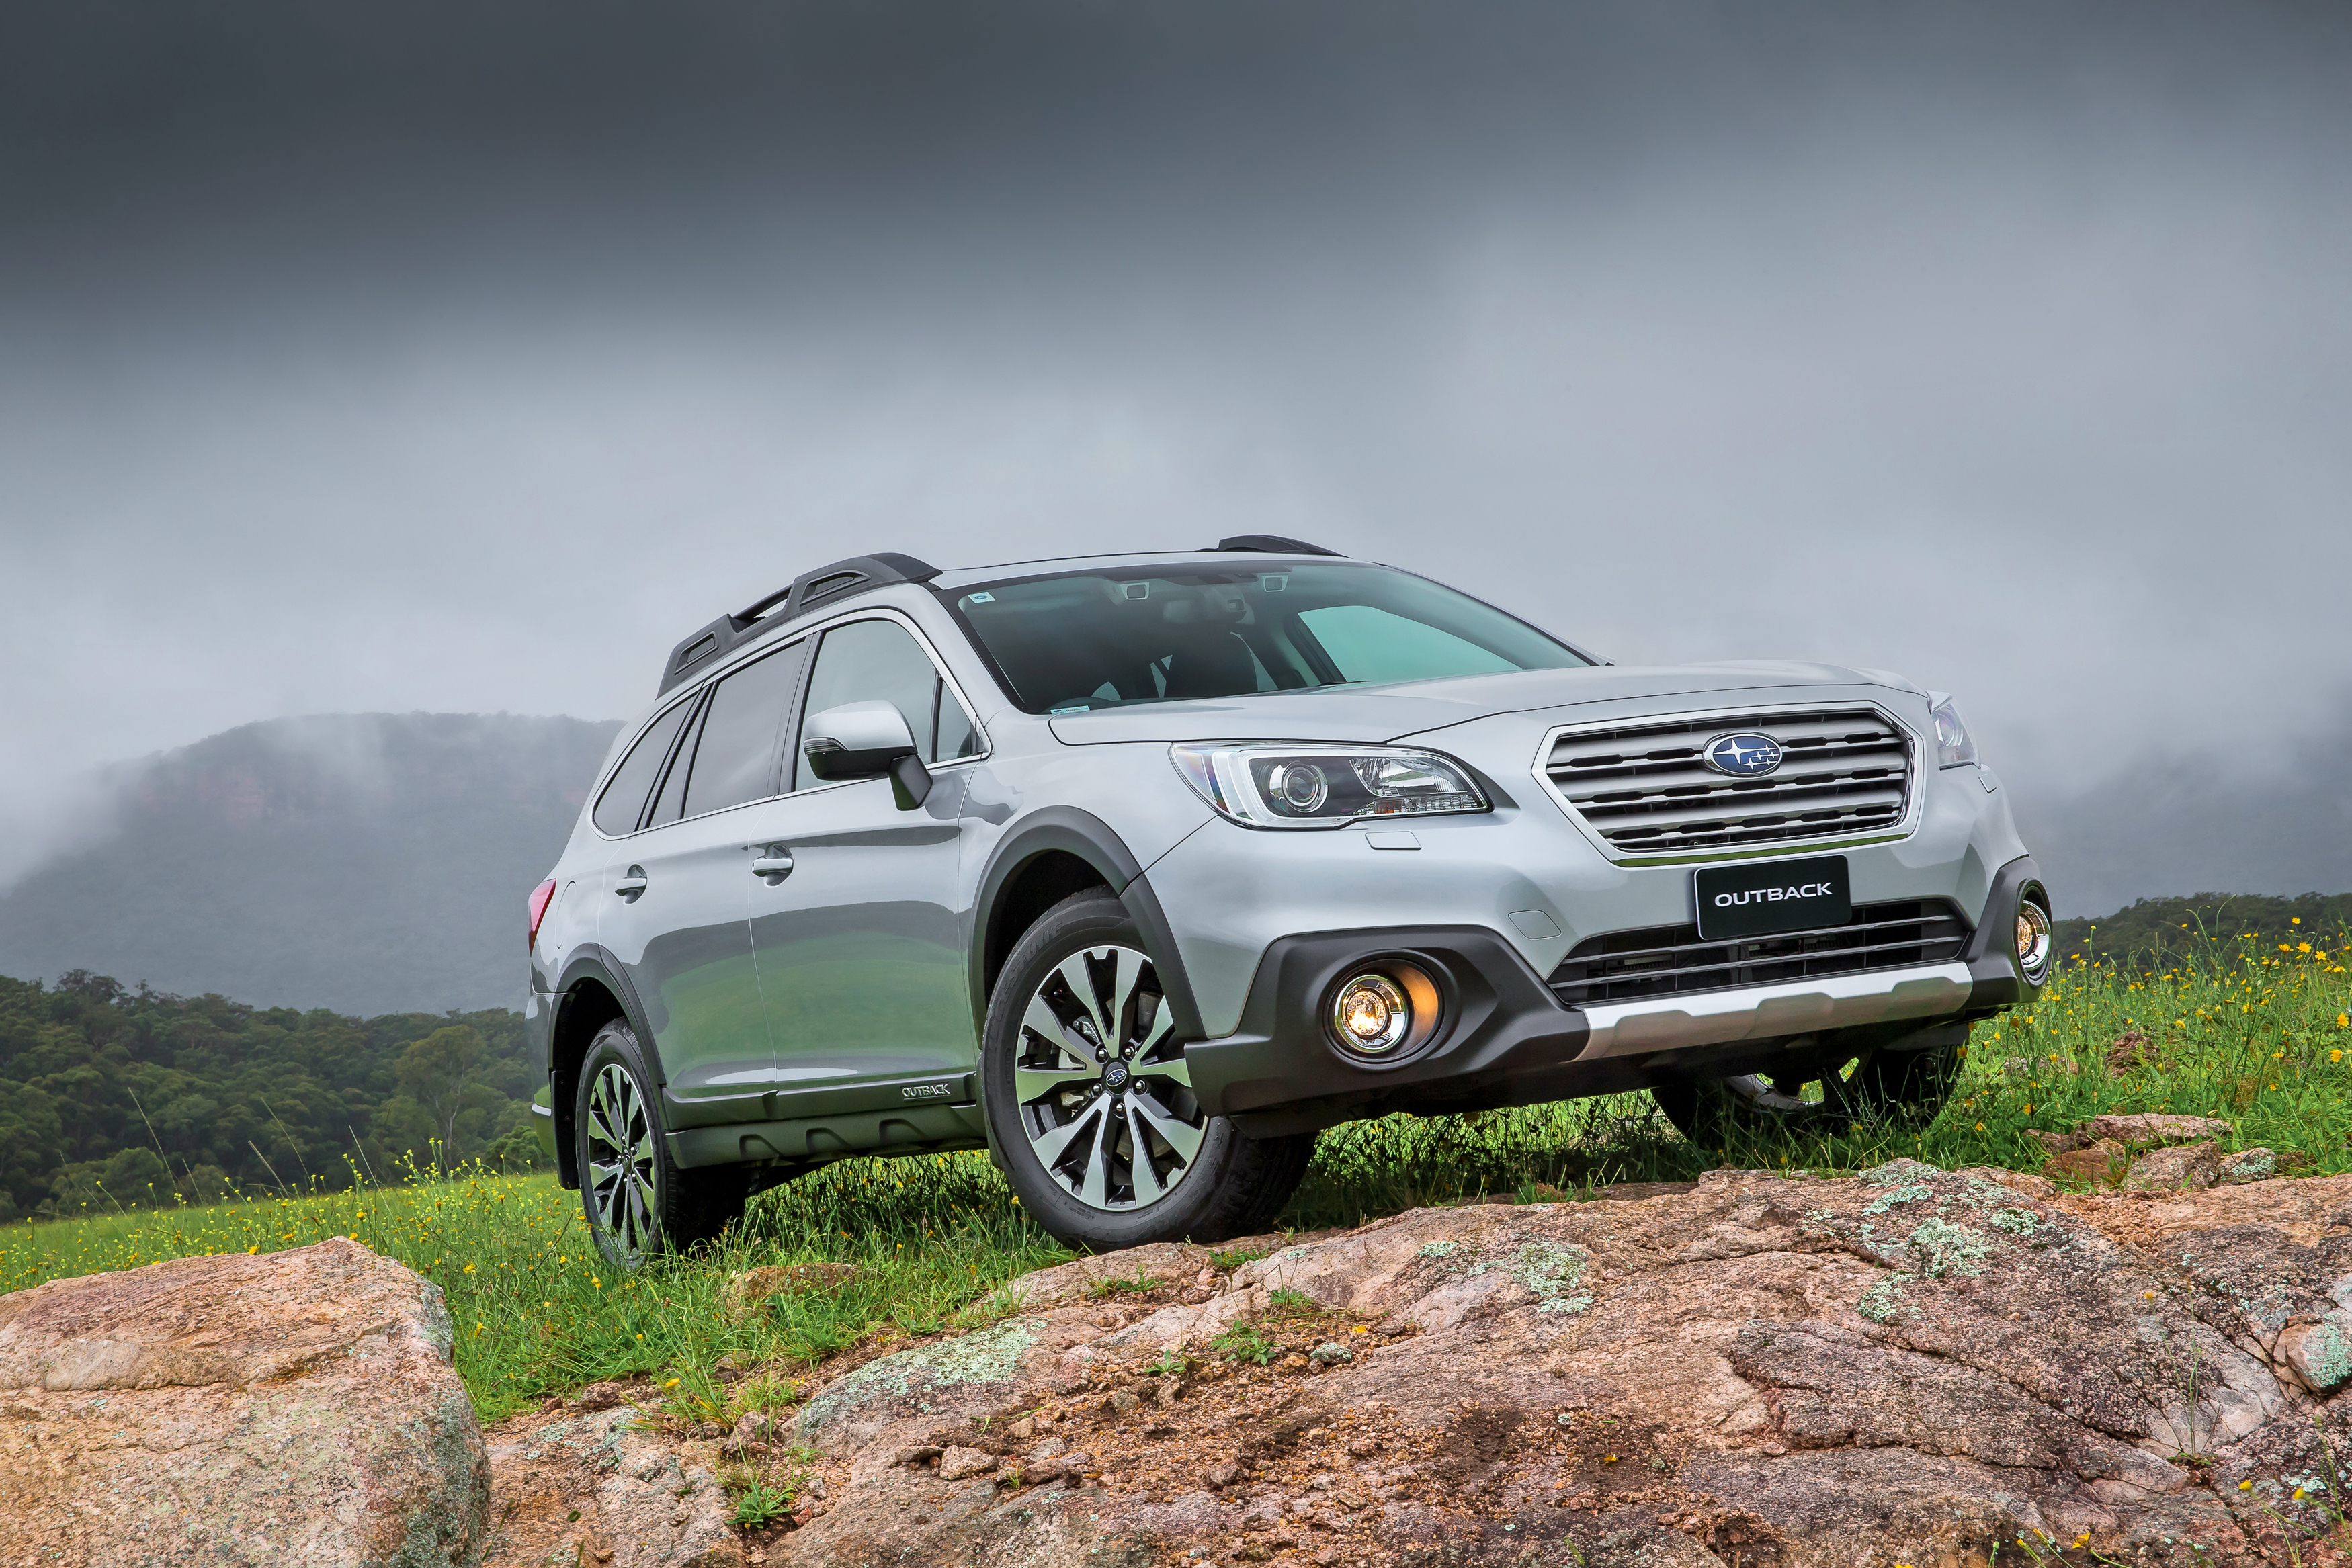 Subaru Outback accessories restyling